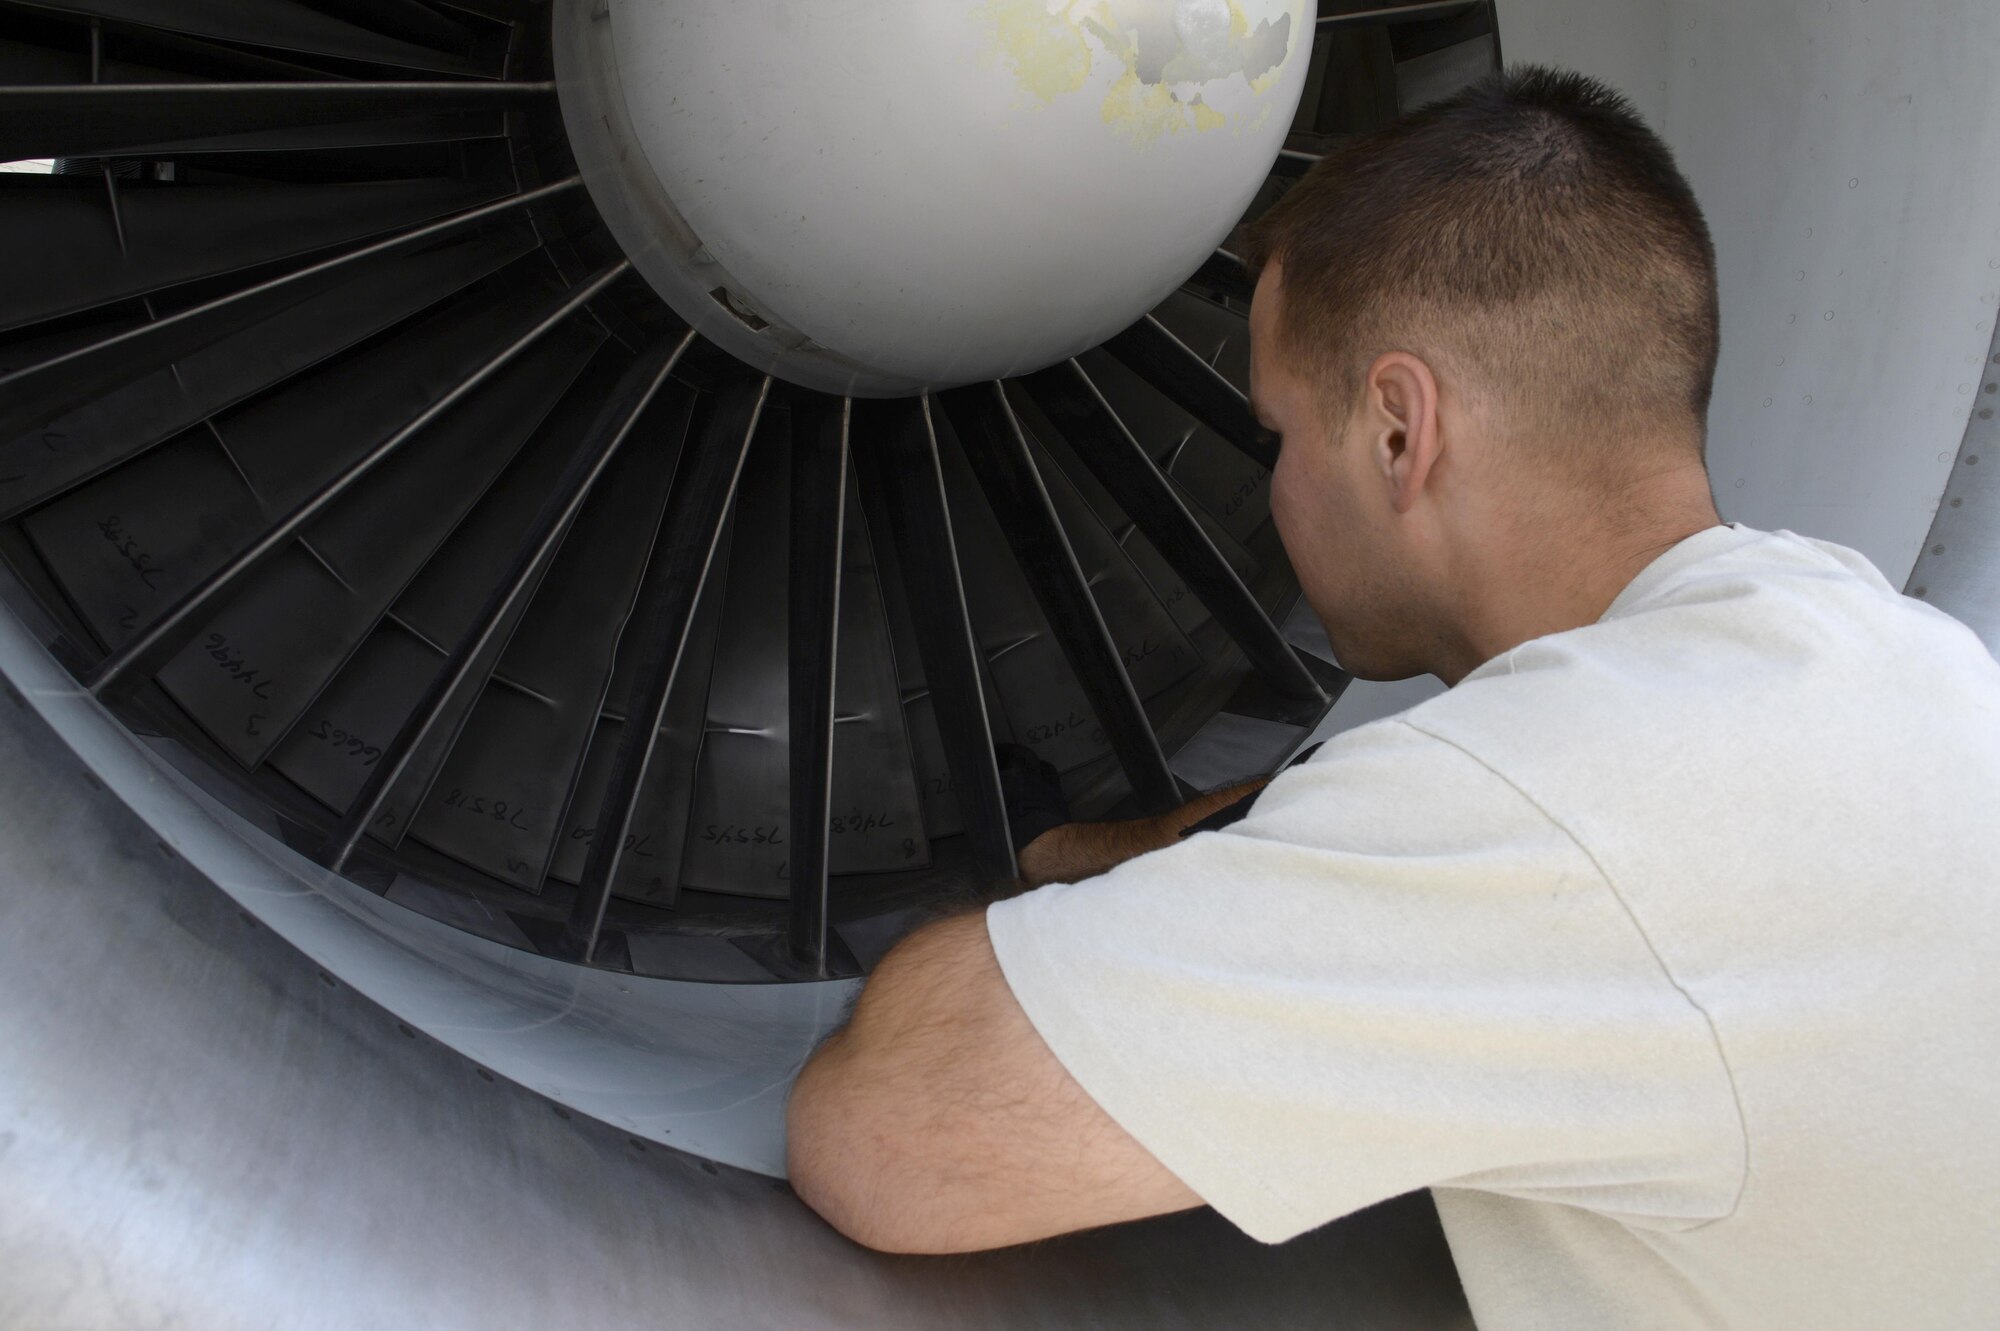 Staff Sgt. Derek, aerospace propulsion craftsman, performs an inlet and exhaust inspection on an E-3 Sentry airborne warning and control system aircraft at an undisclosed location in Southwest Asia Feb. 24, 2015. The inspection was done to check for any damage to the engine or anything that can potentially harm the engine like loose hardware or other forms of foreign objects. Derek is currently deployed from Tinker Air Force Base, Okla., and is a native of Waterboro, Maine. (U.S. Air Force photo/Tech. Sgt. Marie Brown)